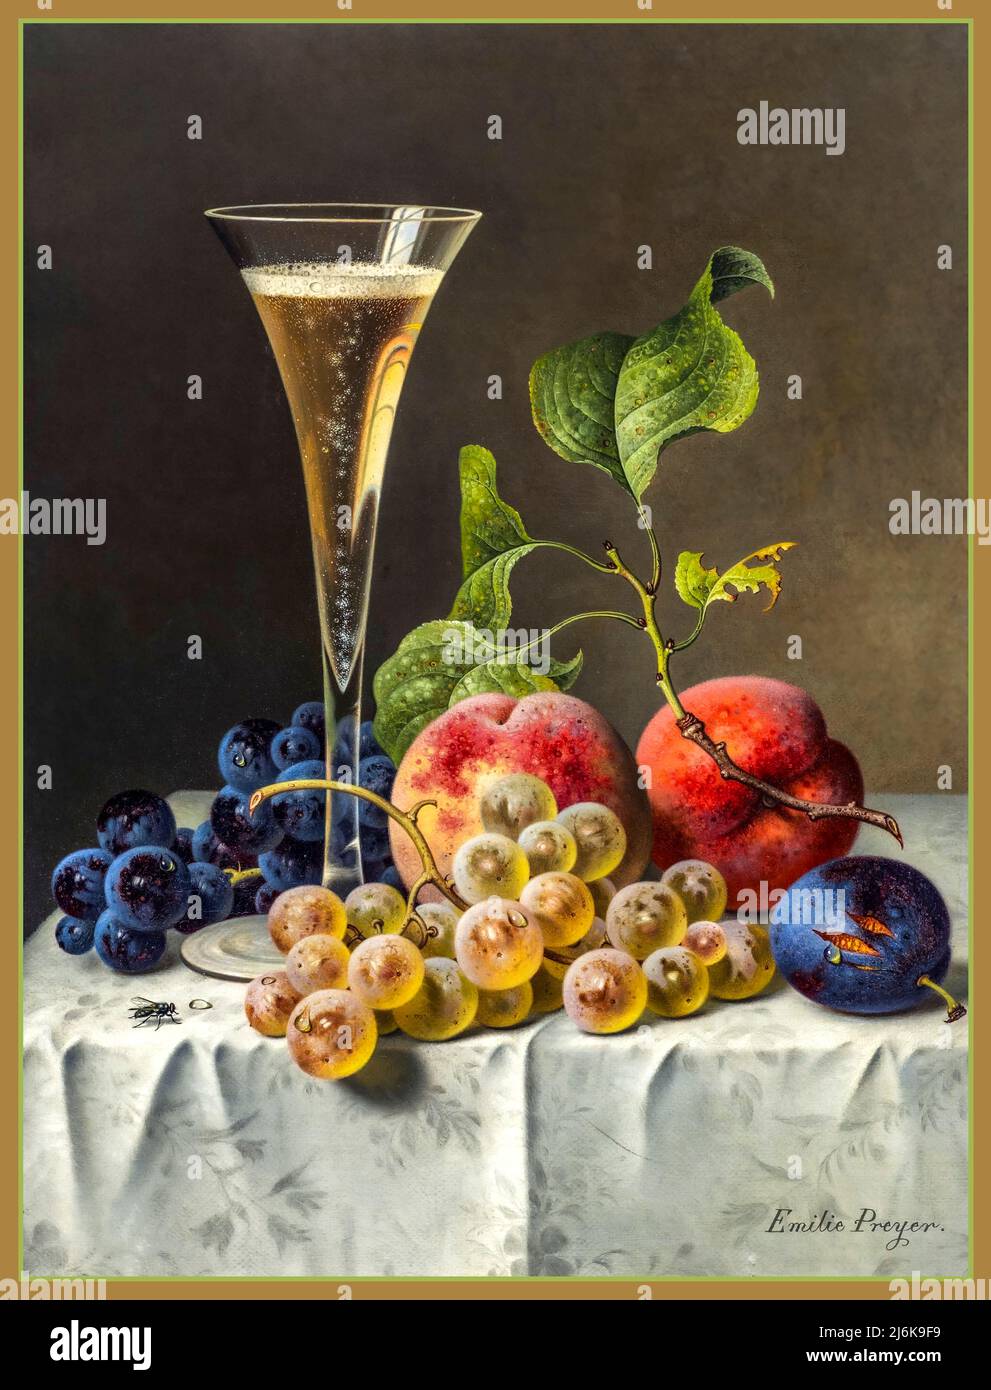 CHAMPAGNE FLUTE & FRUIT Still life by Emile Preyer with champagne glass and fruit grapes plums & peaches oil painting and house fly on tablecloth, oil on canvas by Artist Emile Preyer 1849-1930 Stock Photo